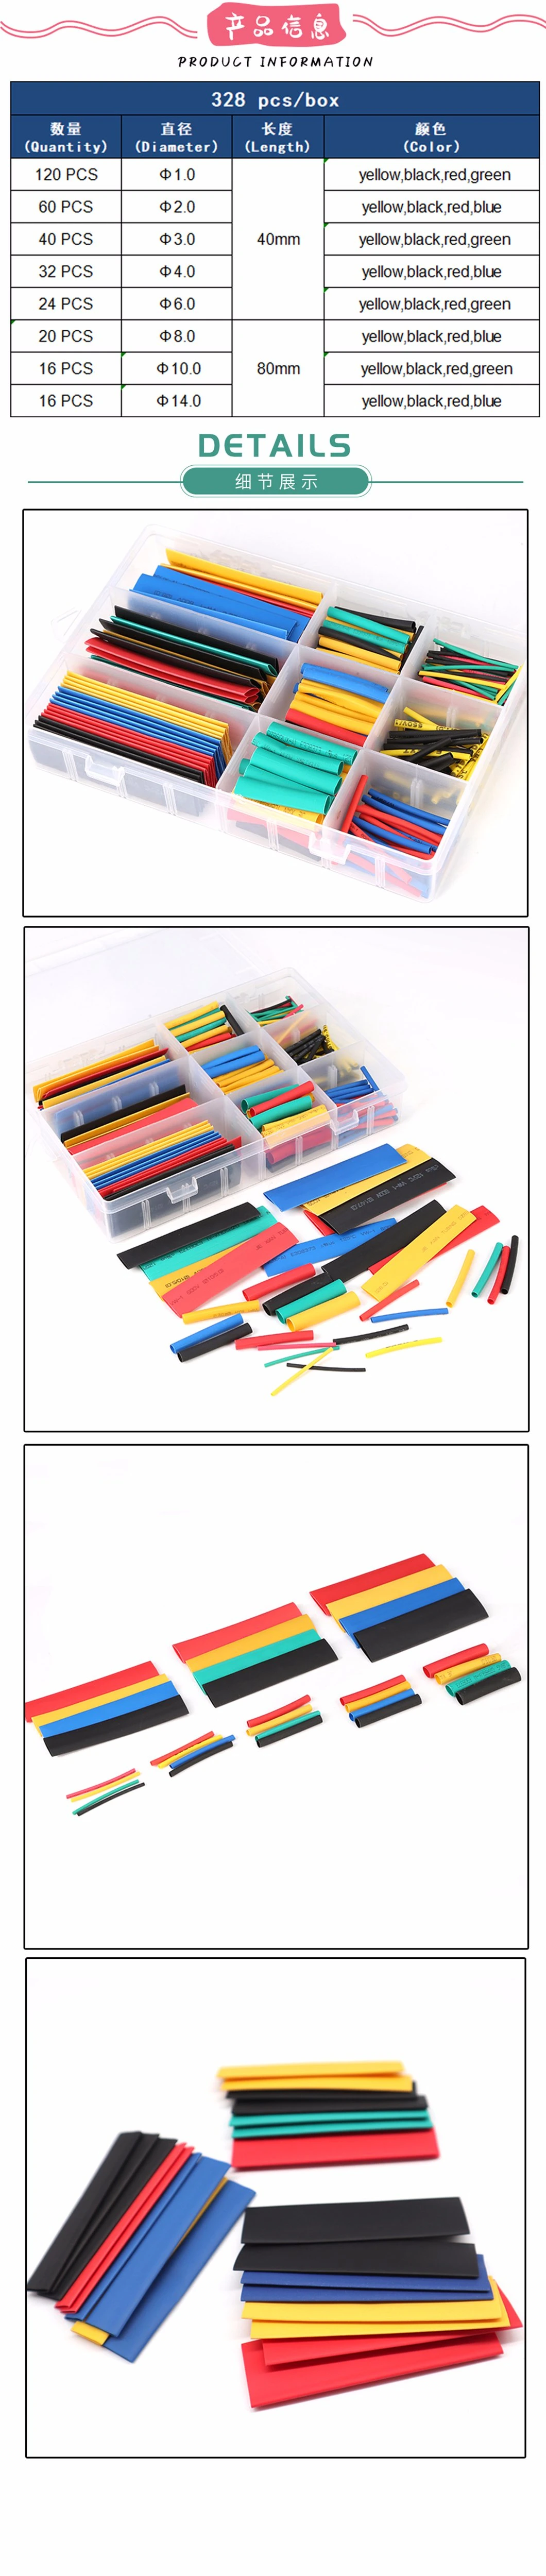 Flame-Retardant Heat Shrinkable Tube Shrinking Assorted Heat Shrink Tube Wire Cable Insulated Sleeving Tubing Set